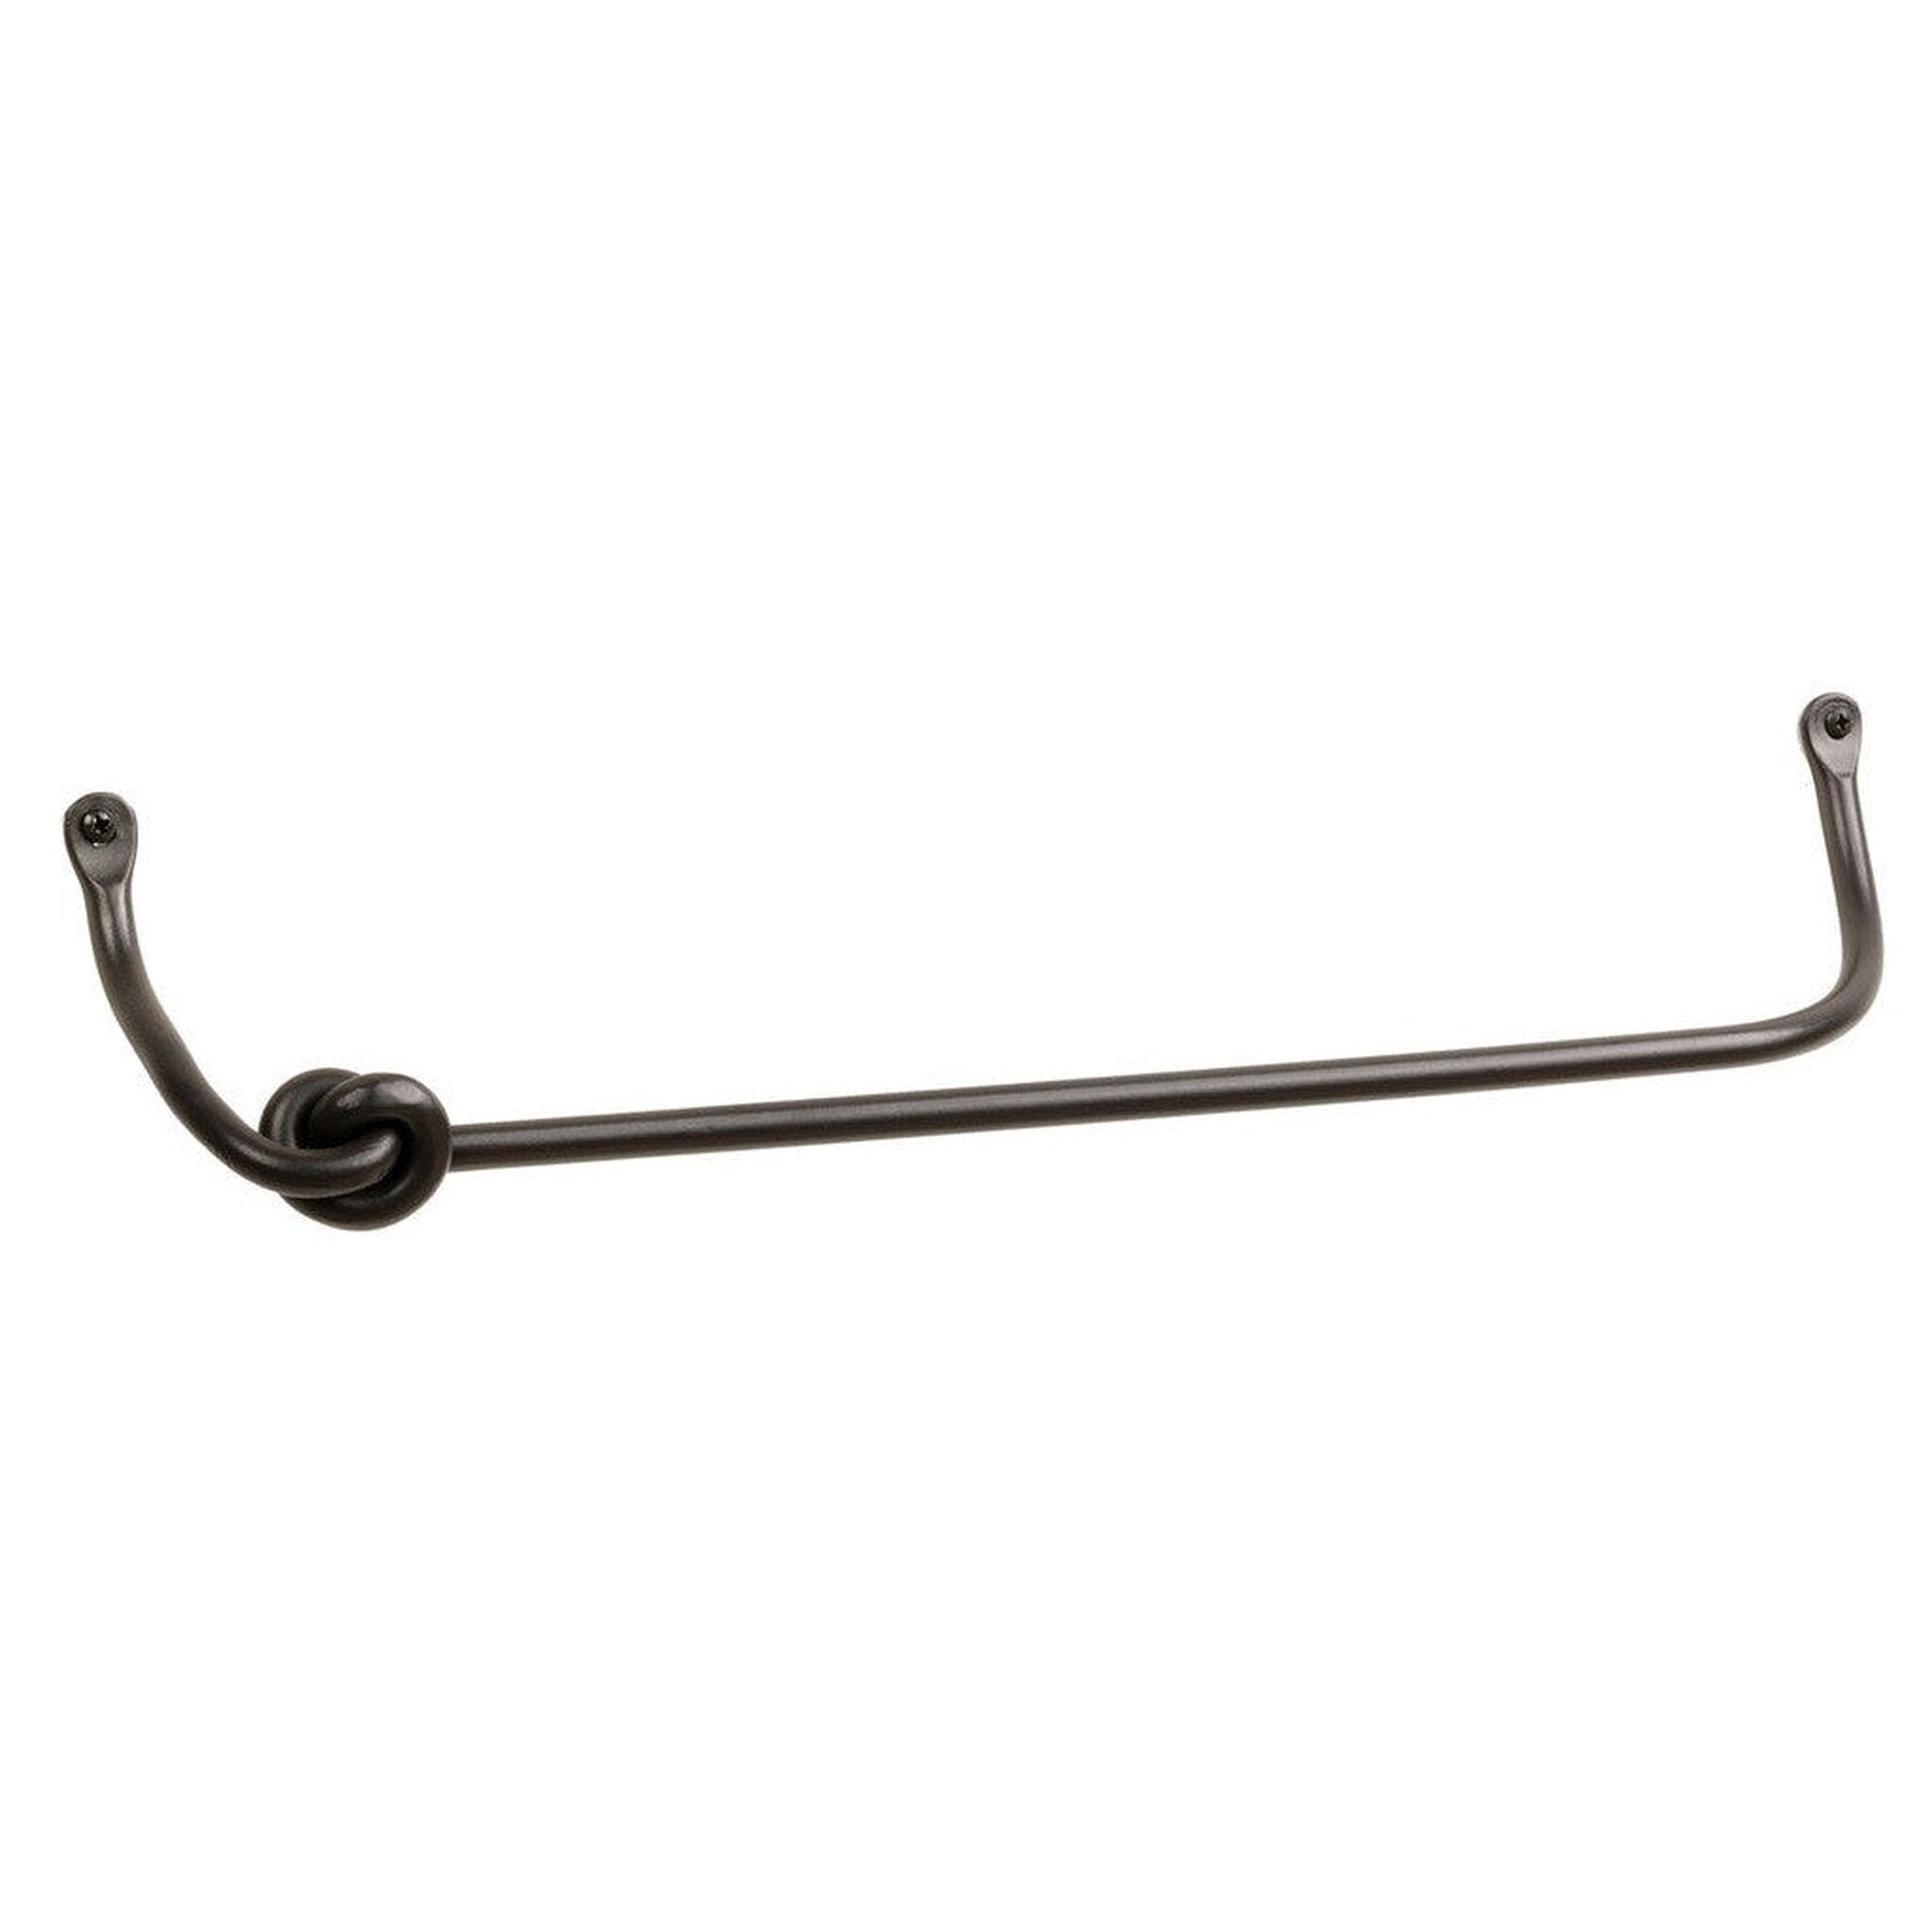 Stone County Ironworks Knot 16" Hand Rubbed Brass Iron Towel Bar